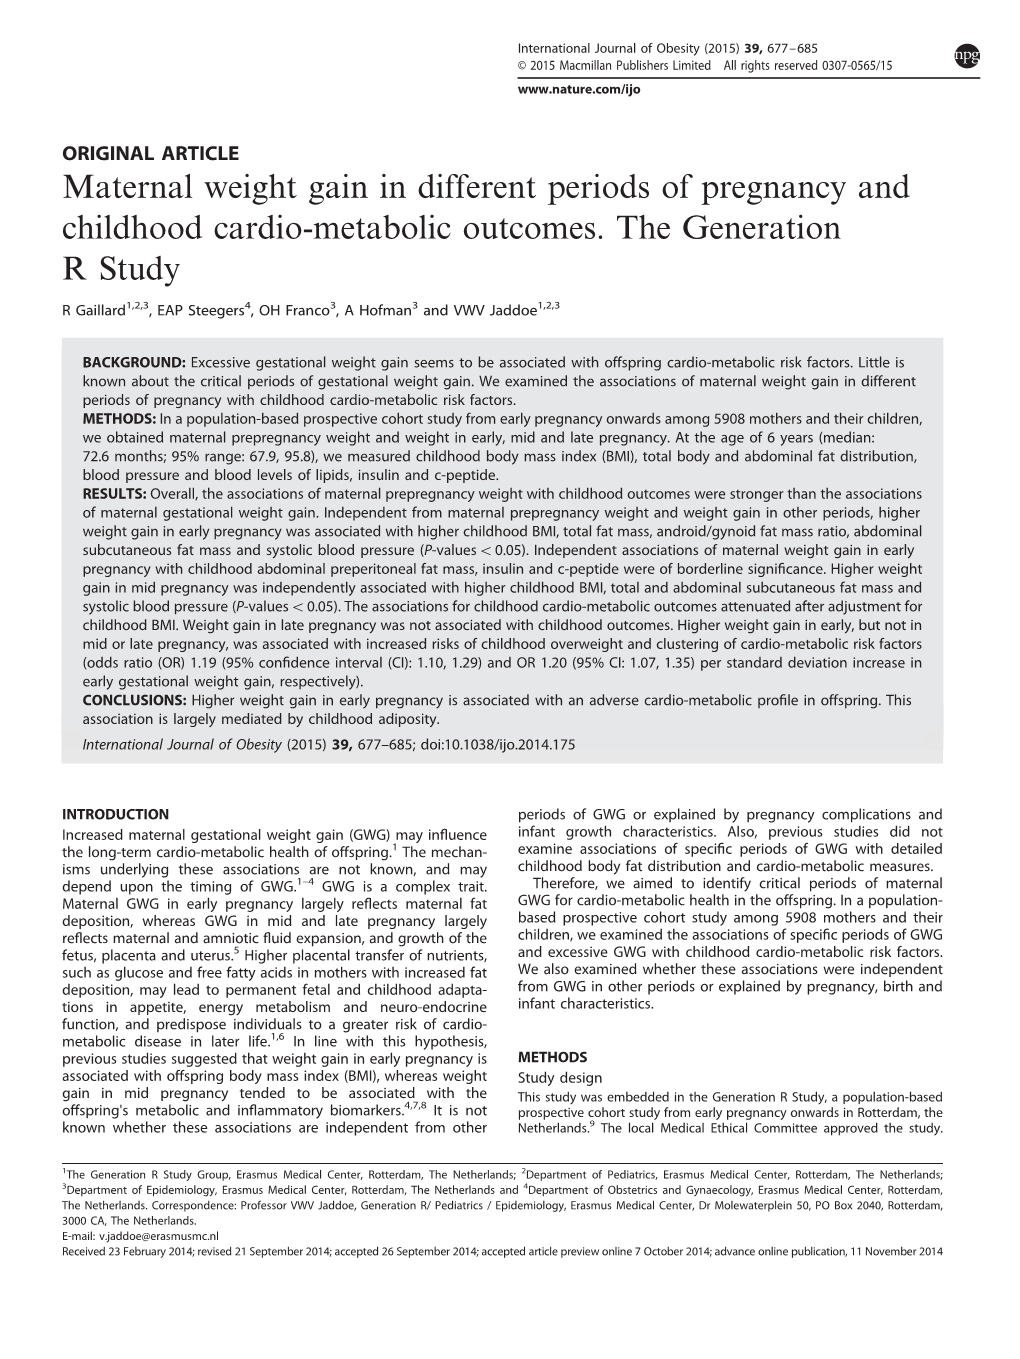 Maternal Weight Gain in Different Periods of Pregnancy and Childhood Cardio-Metabolic Outcomes